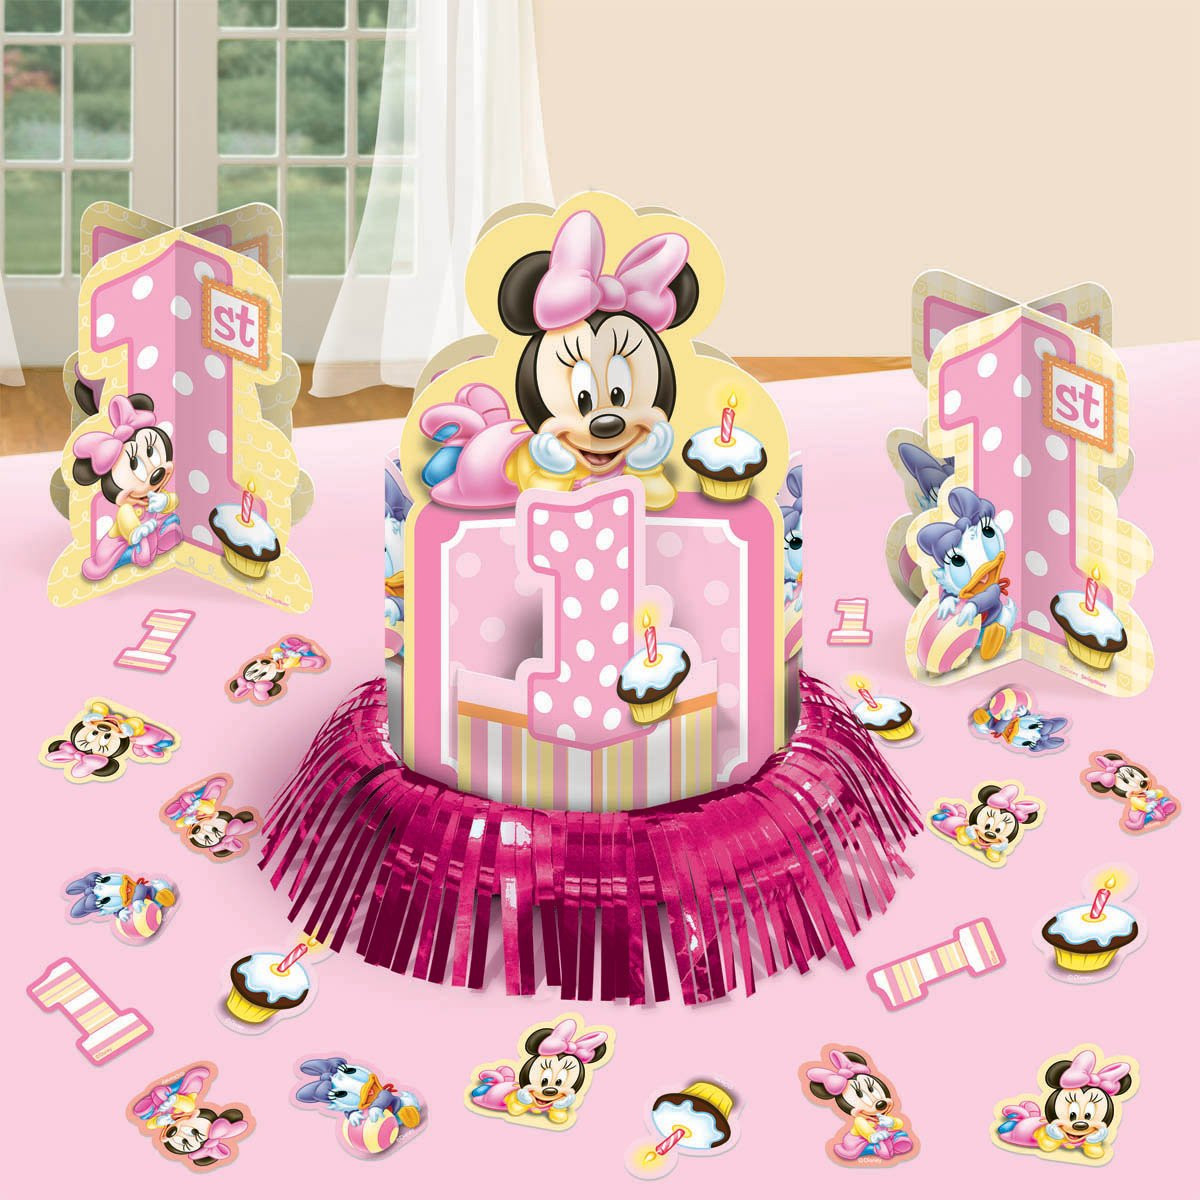 Minnie Mouse First Birthday Decorations
 Baby Minnie Mouse Decorations